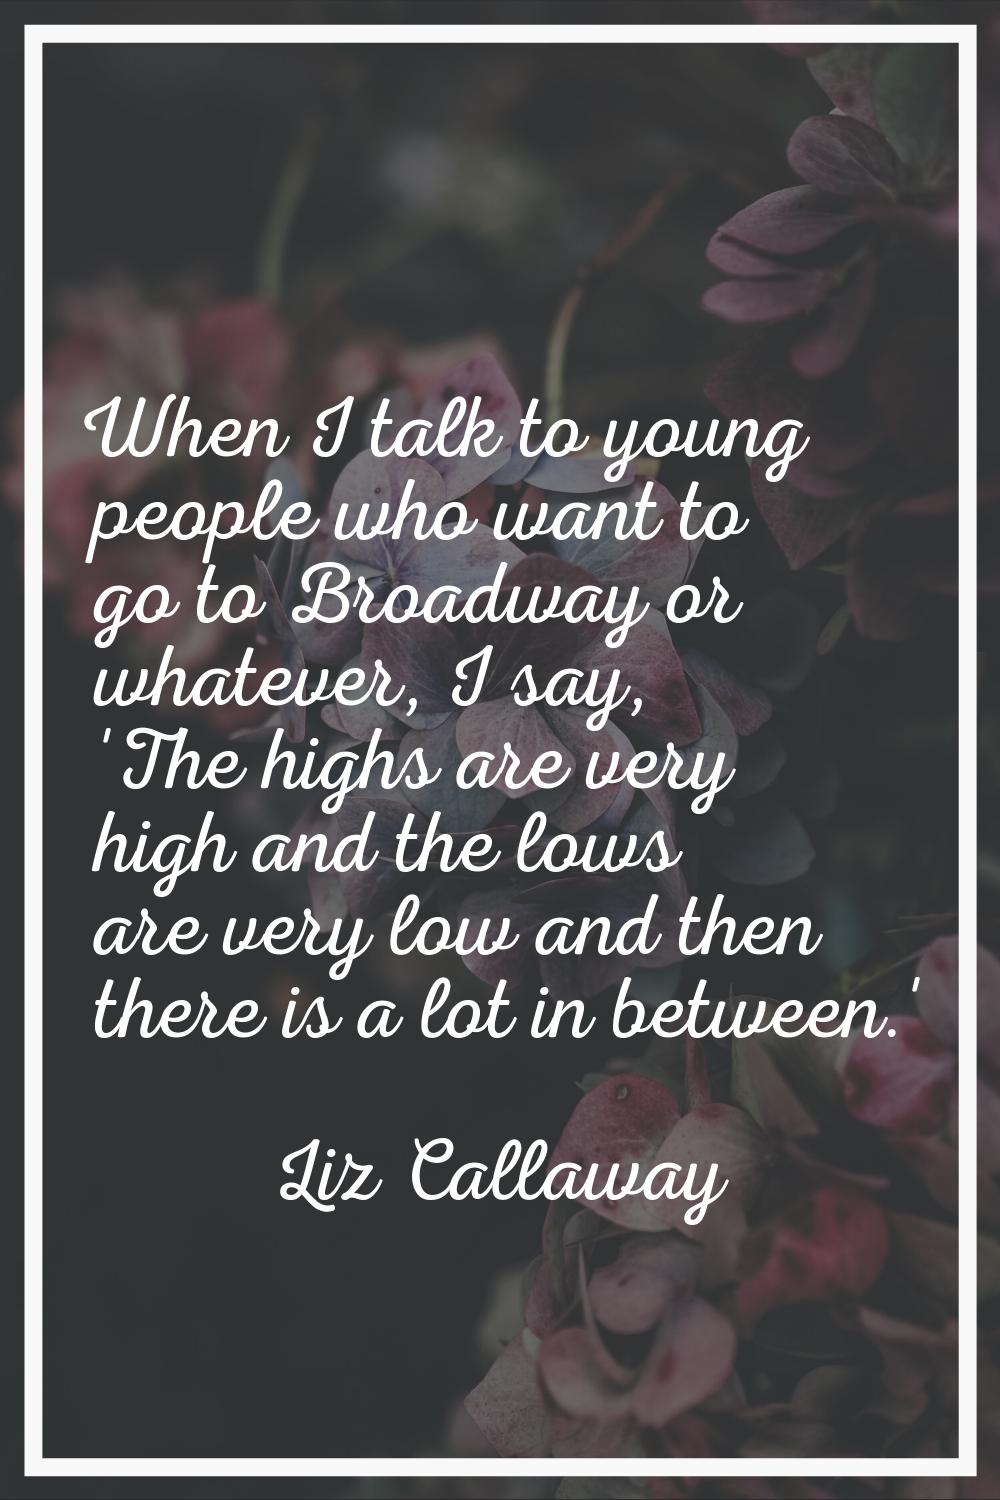 When I talk to young people who want to go to Broadway or whatever, I say, 'The highs are very high